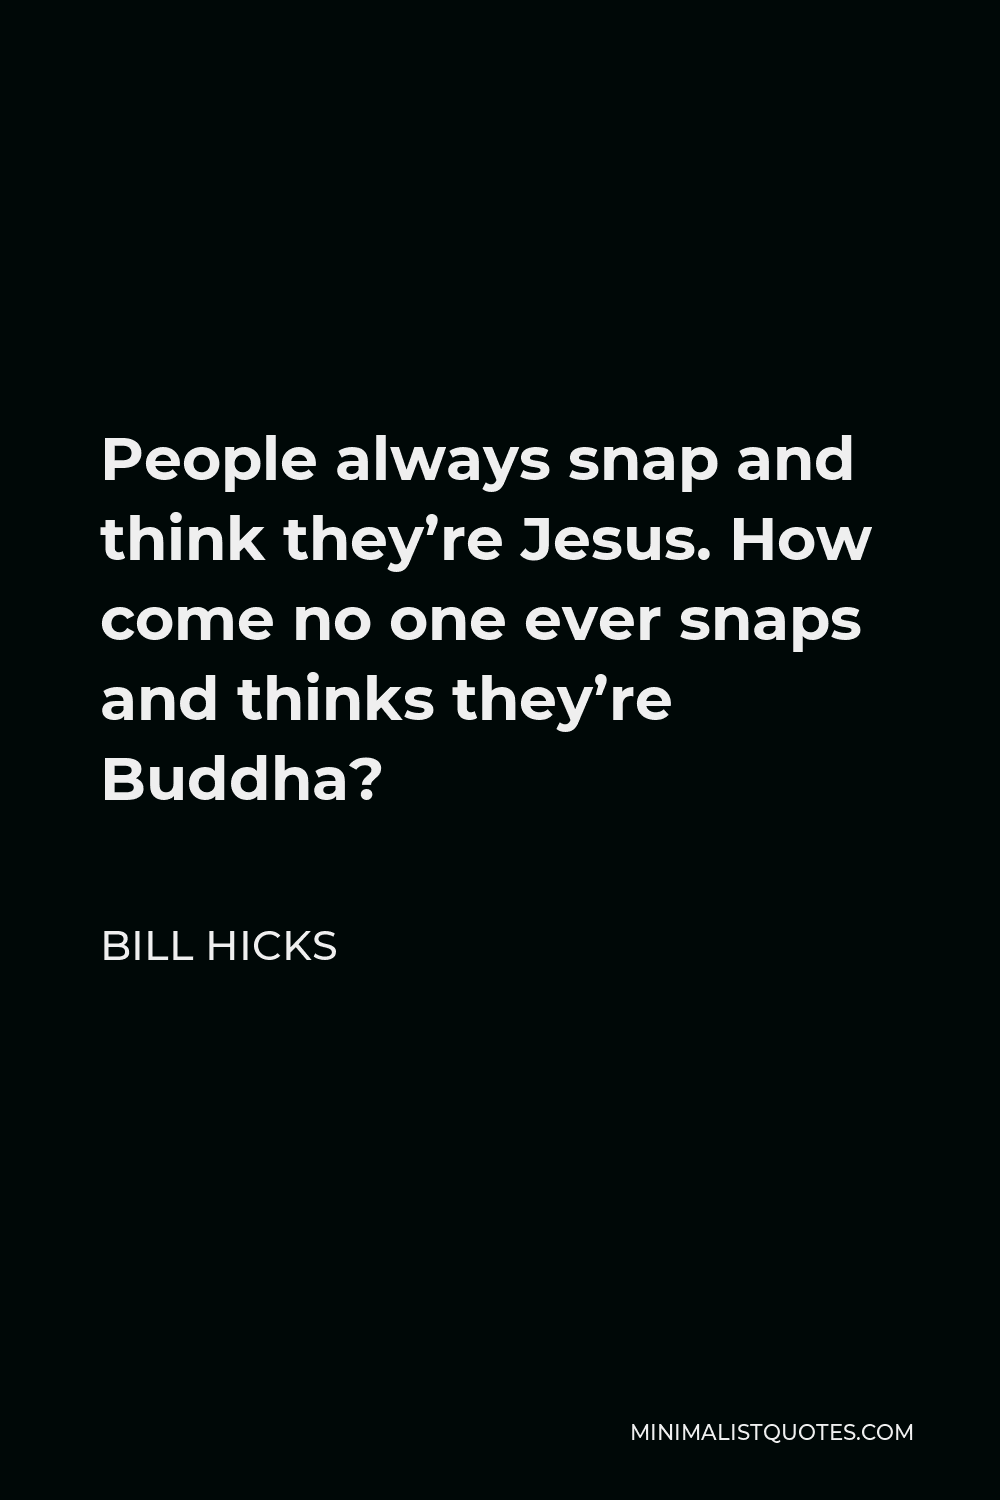 Bill Hicks Quote - People always snap and think they’re Jesus. How come no one ever snaps and thinks they’re Buddha?